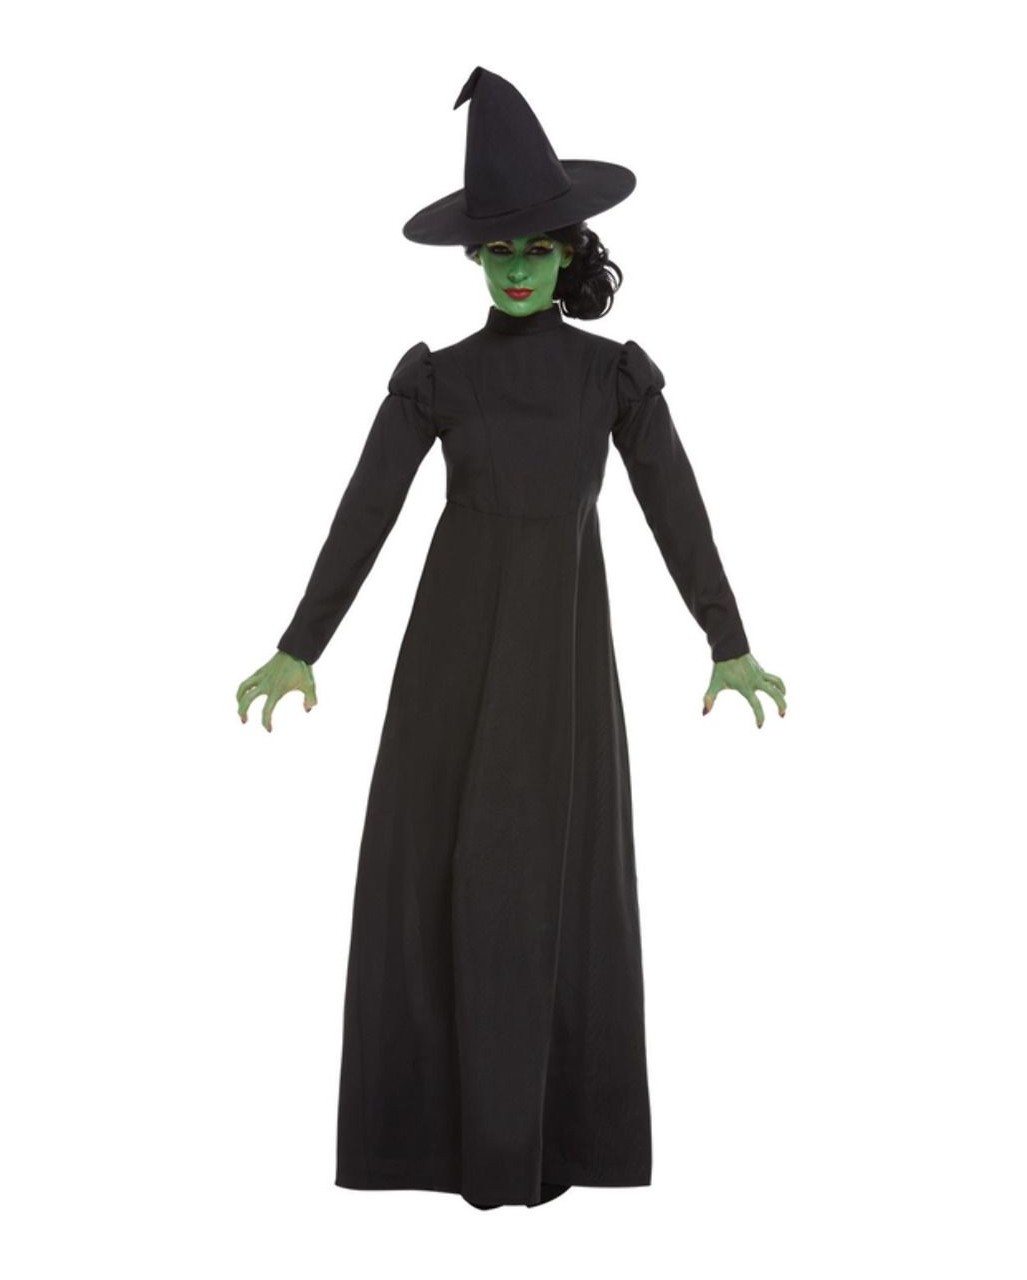 Brand New Wicked Witch of the West Adult Costume 